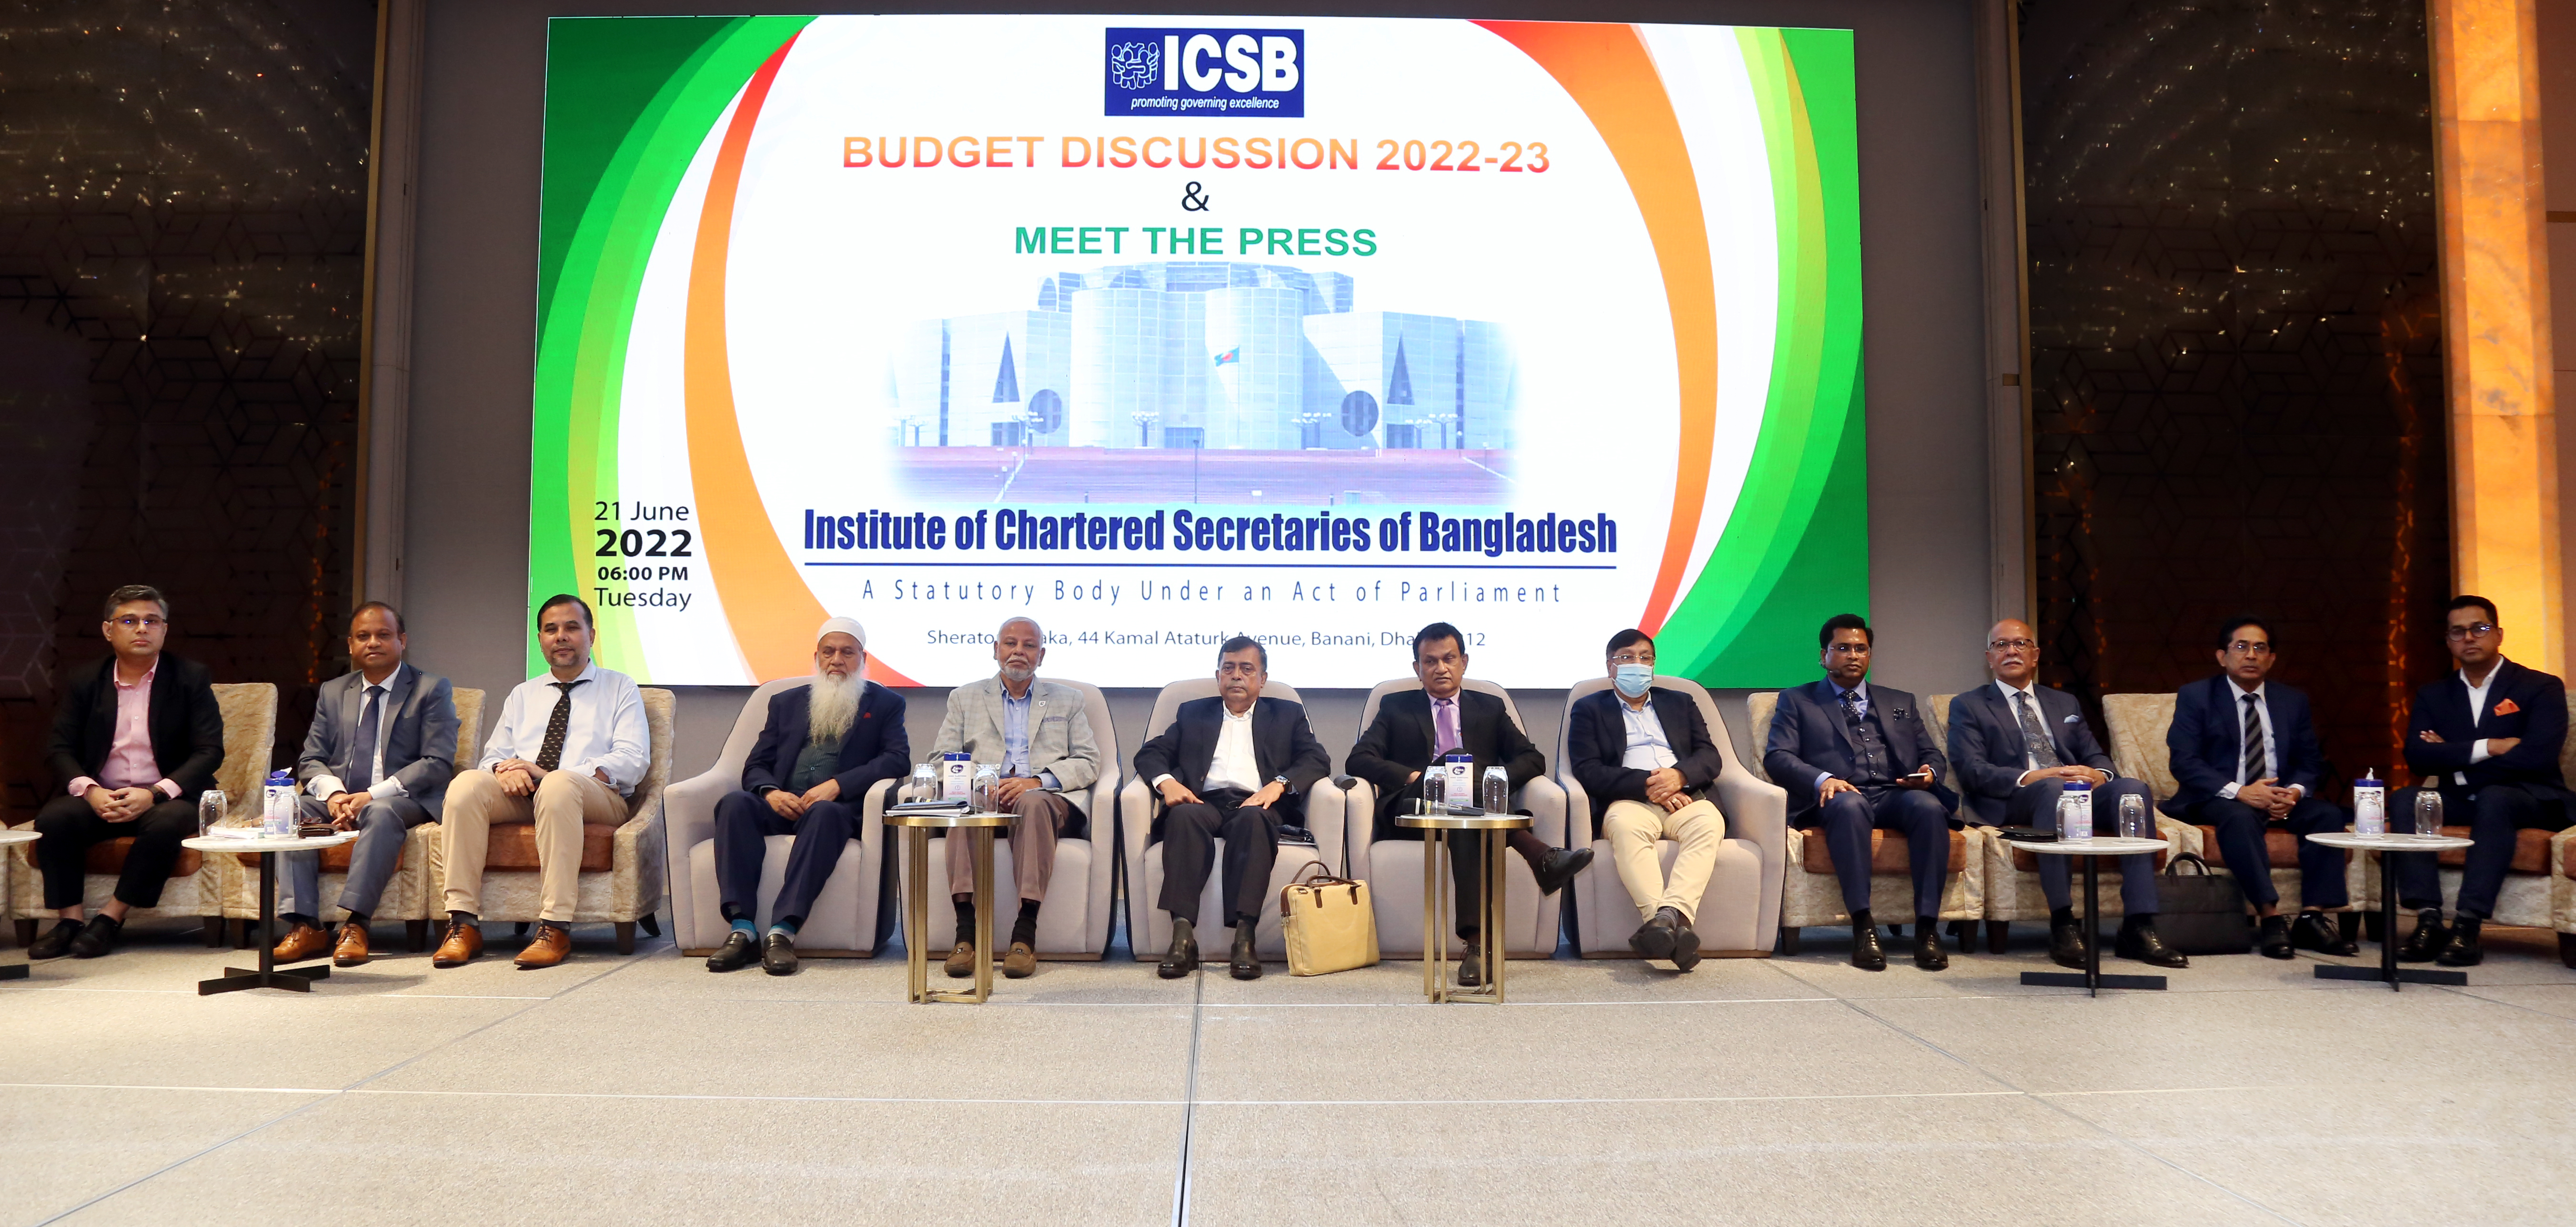 ICSB held Budget Discussion 